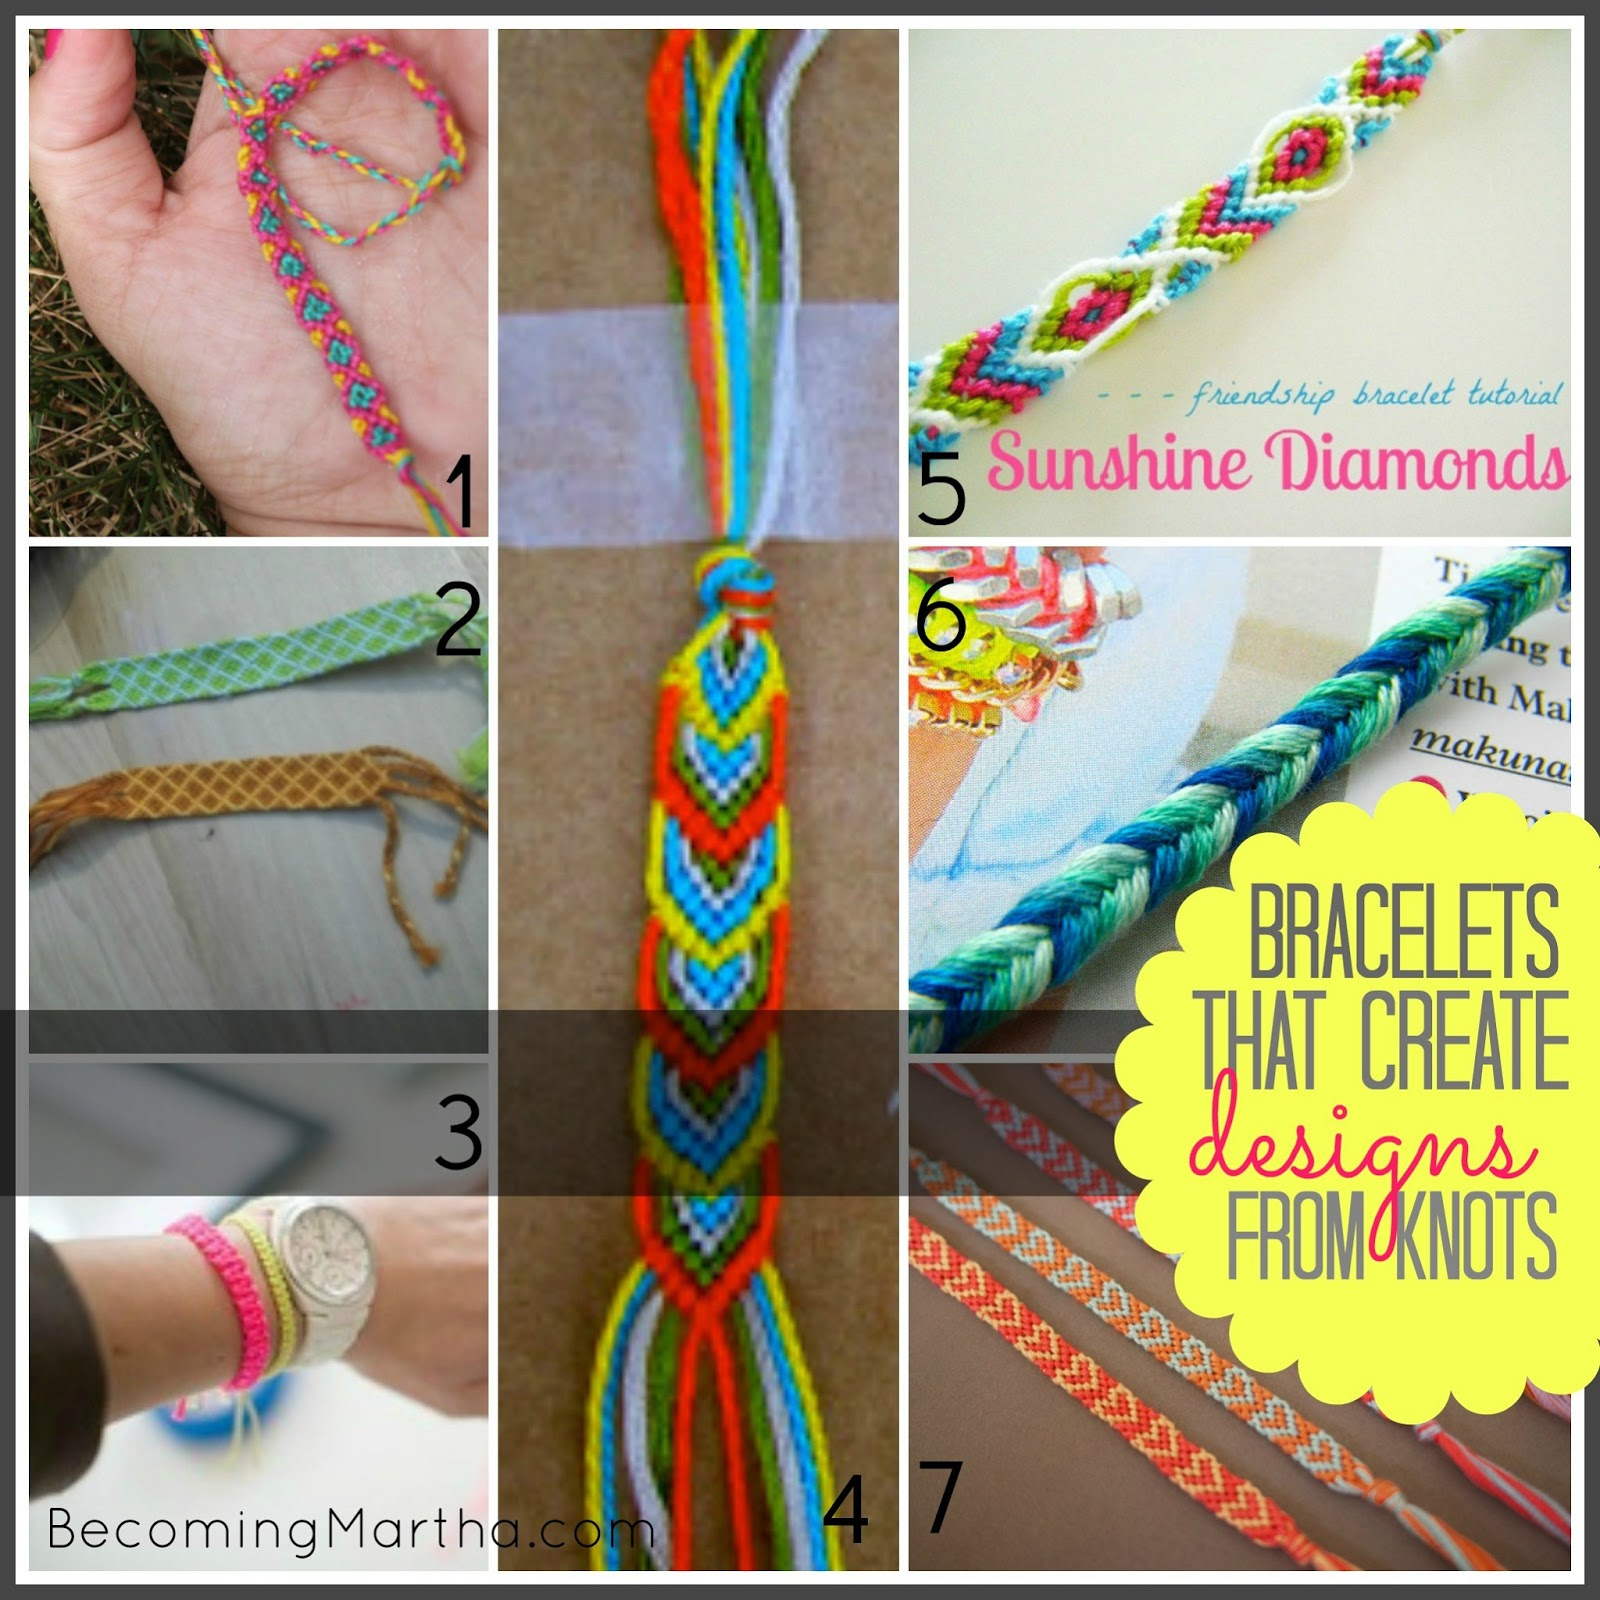 Bracelet Patterns With Embroidery Floss 20 Friendship Bracelet Tutorials From 1 Supply The Simply Crafted Life